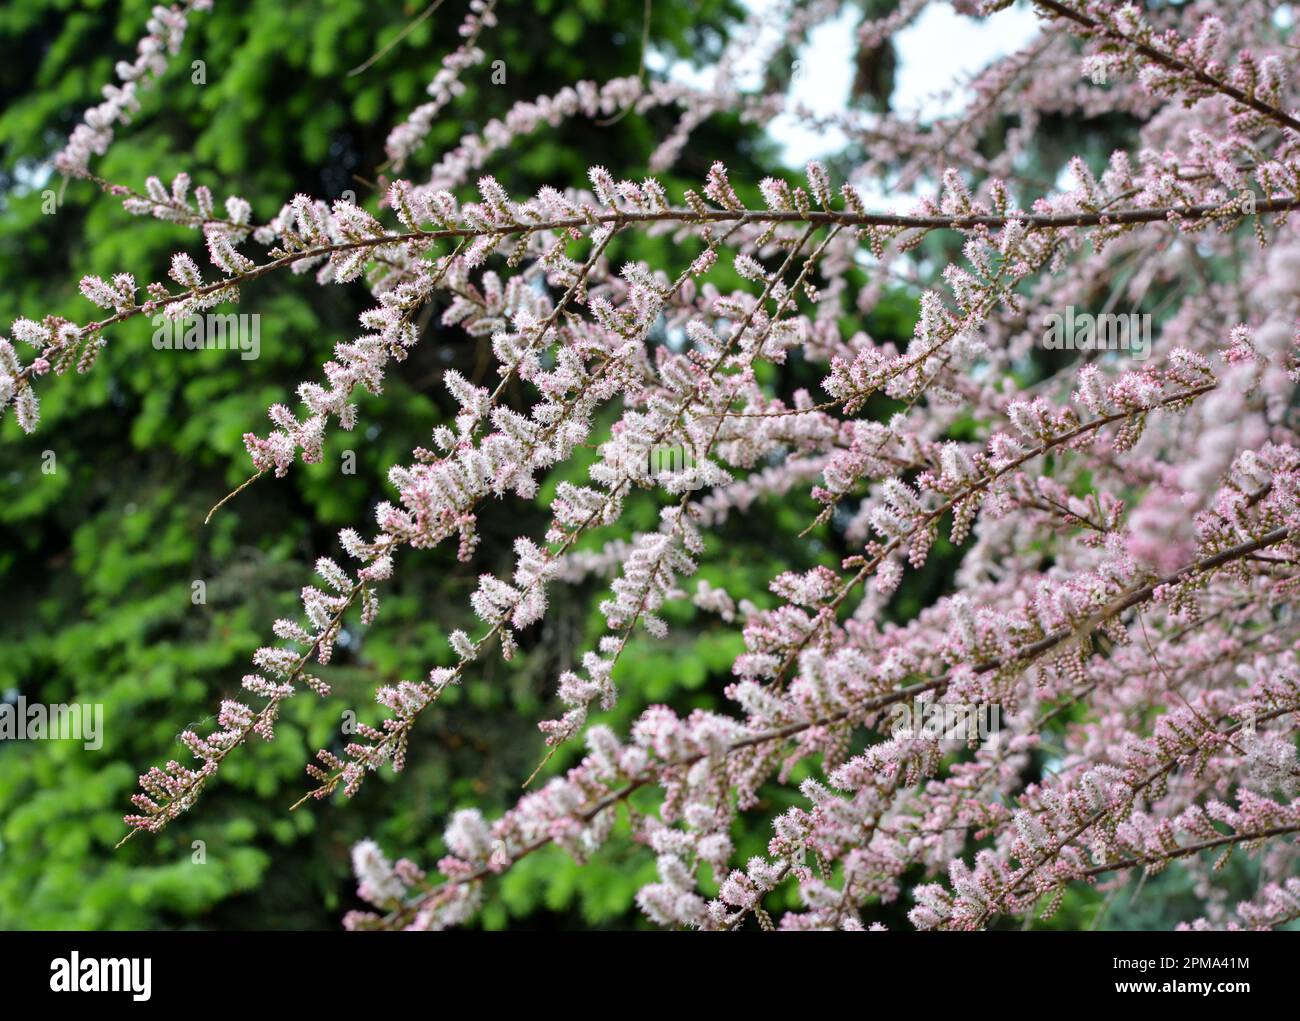 In spring, the ornamental plant tamarix grows in nature Stock Photo